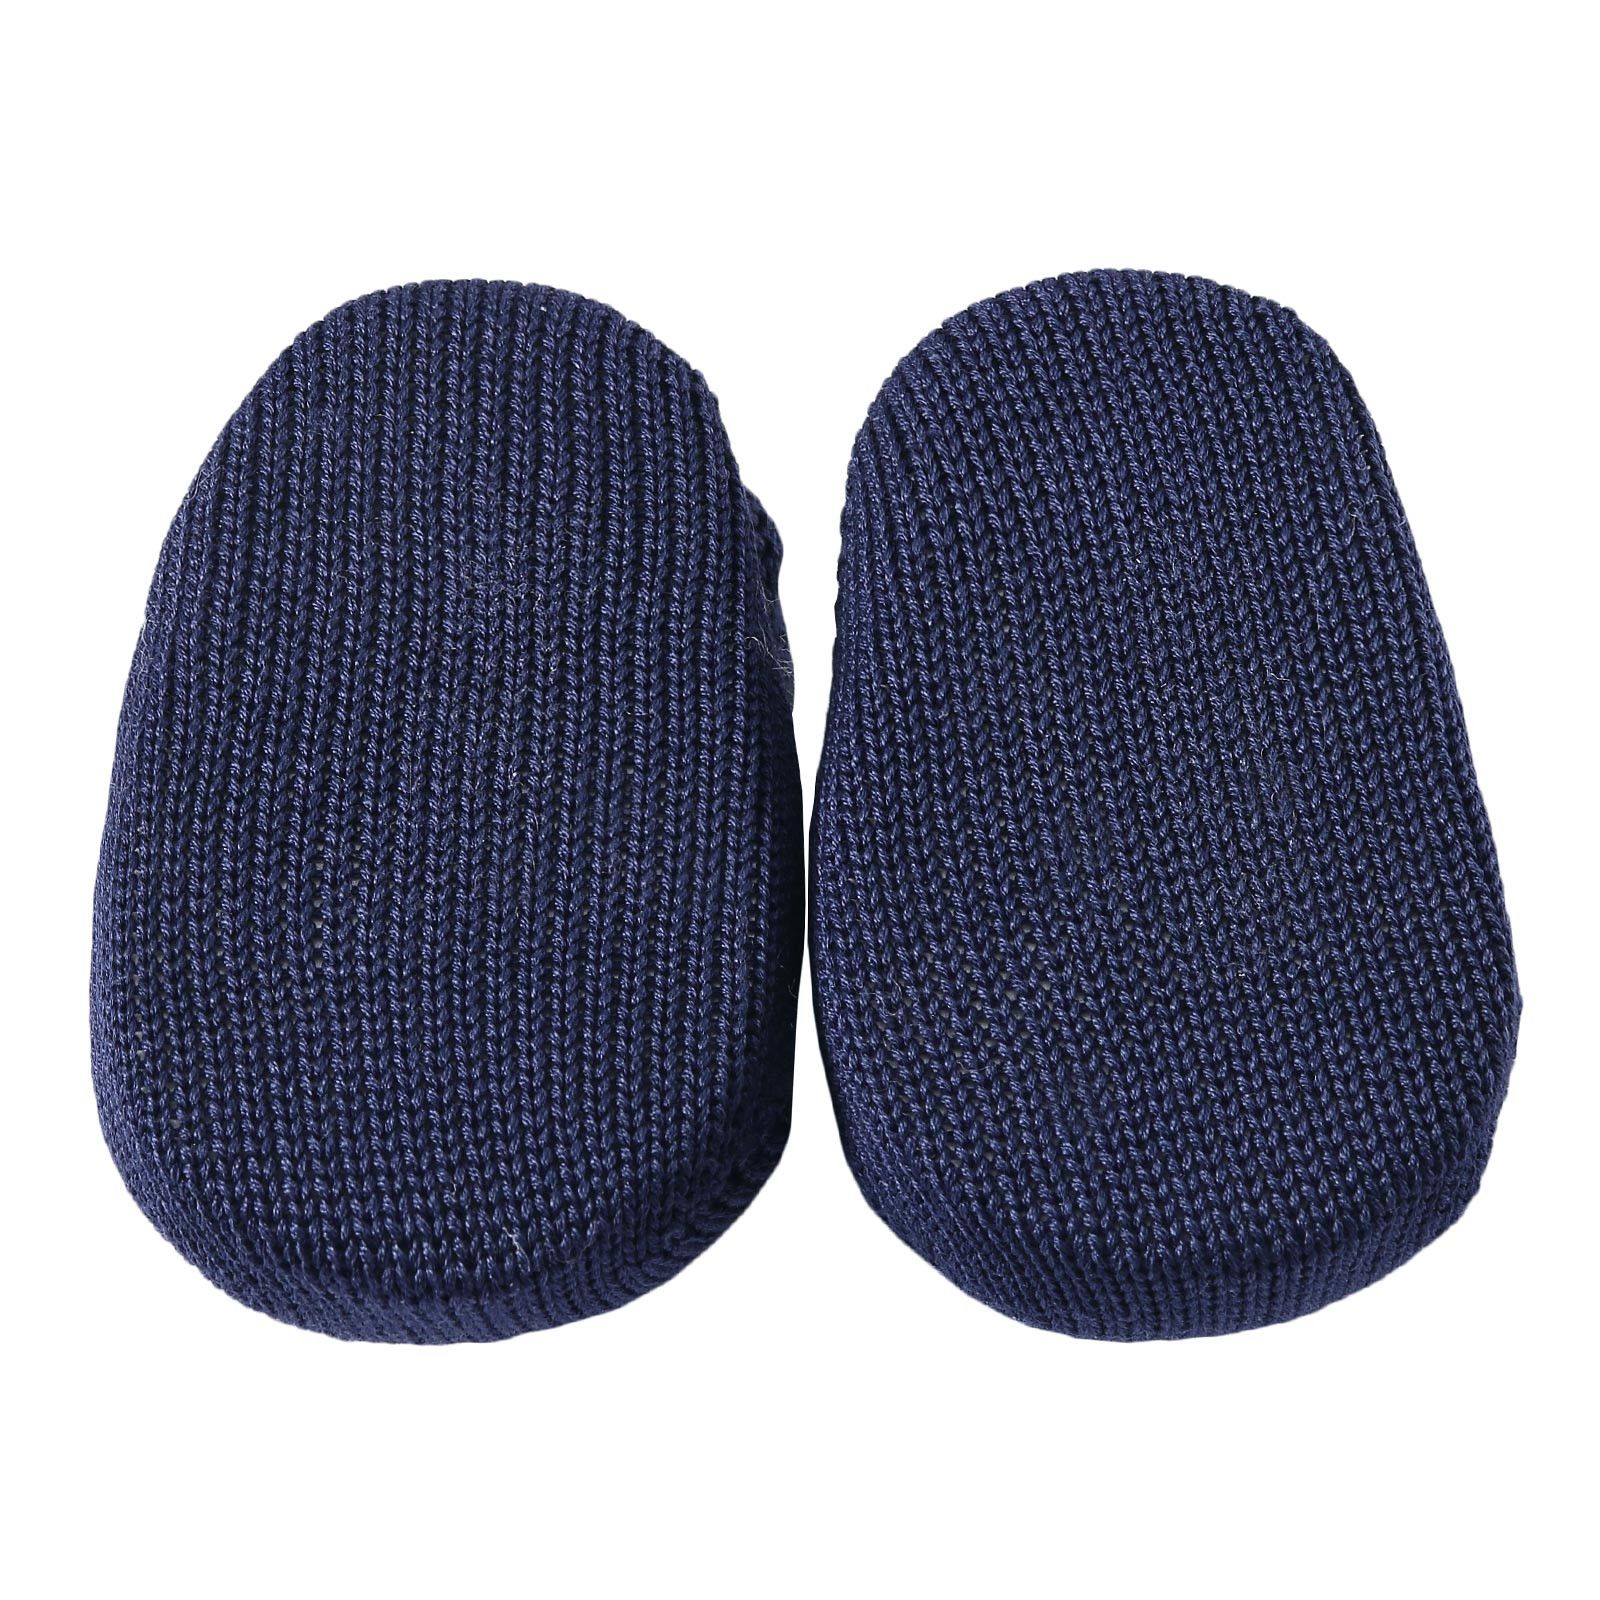 Baby Navy Blue Knitted Cotton Shoes - CÉMAROSE | Children's Fashion Store - 4